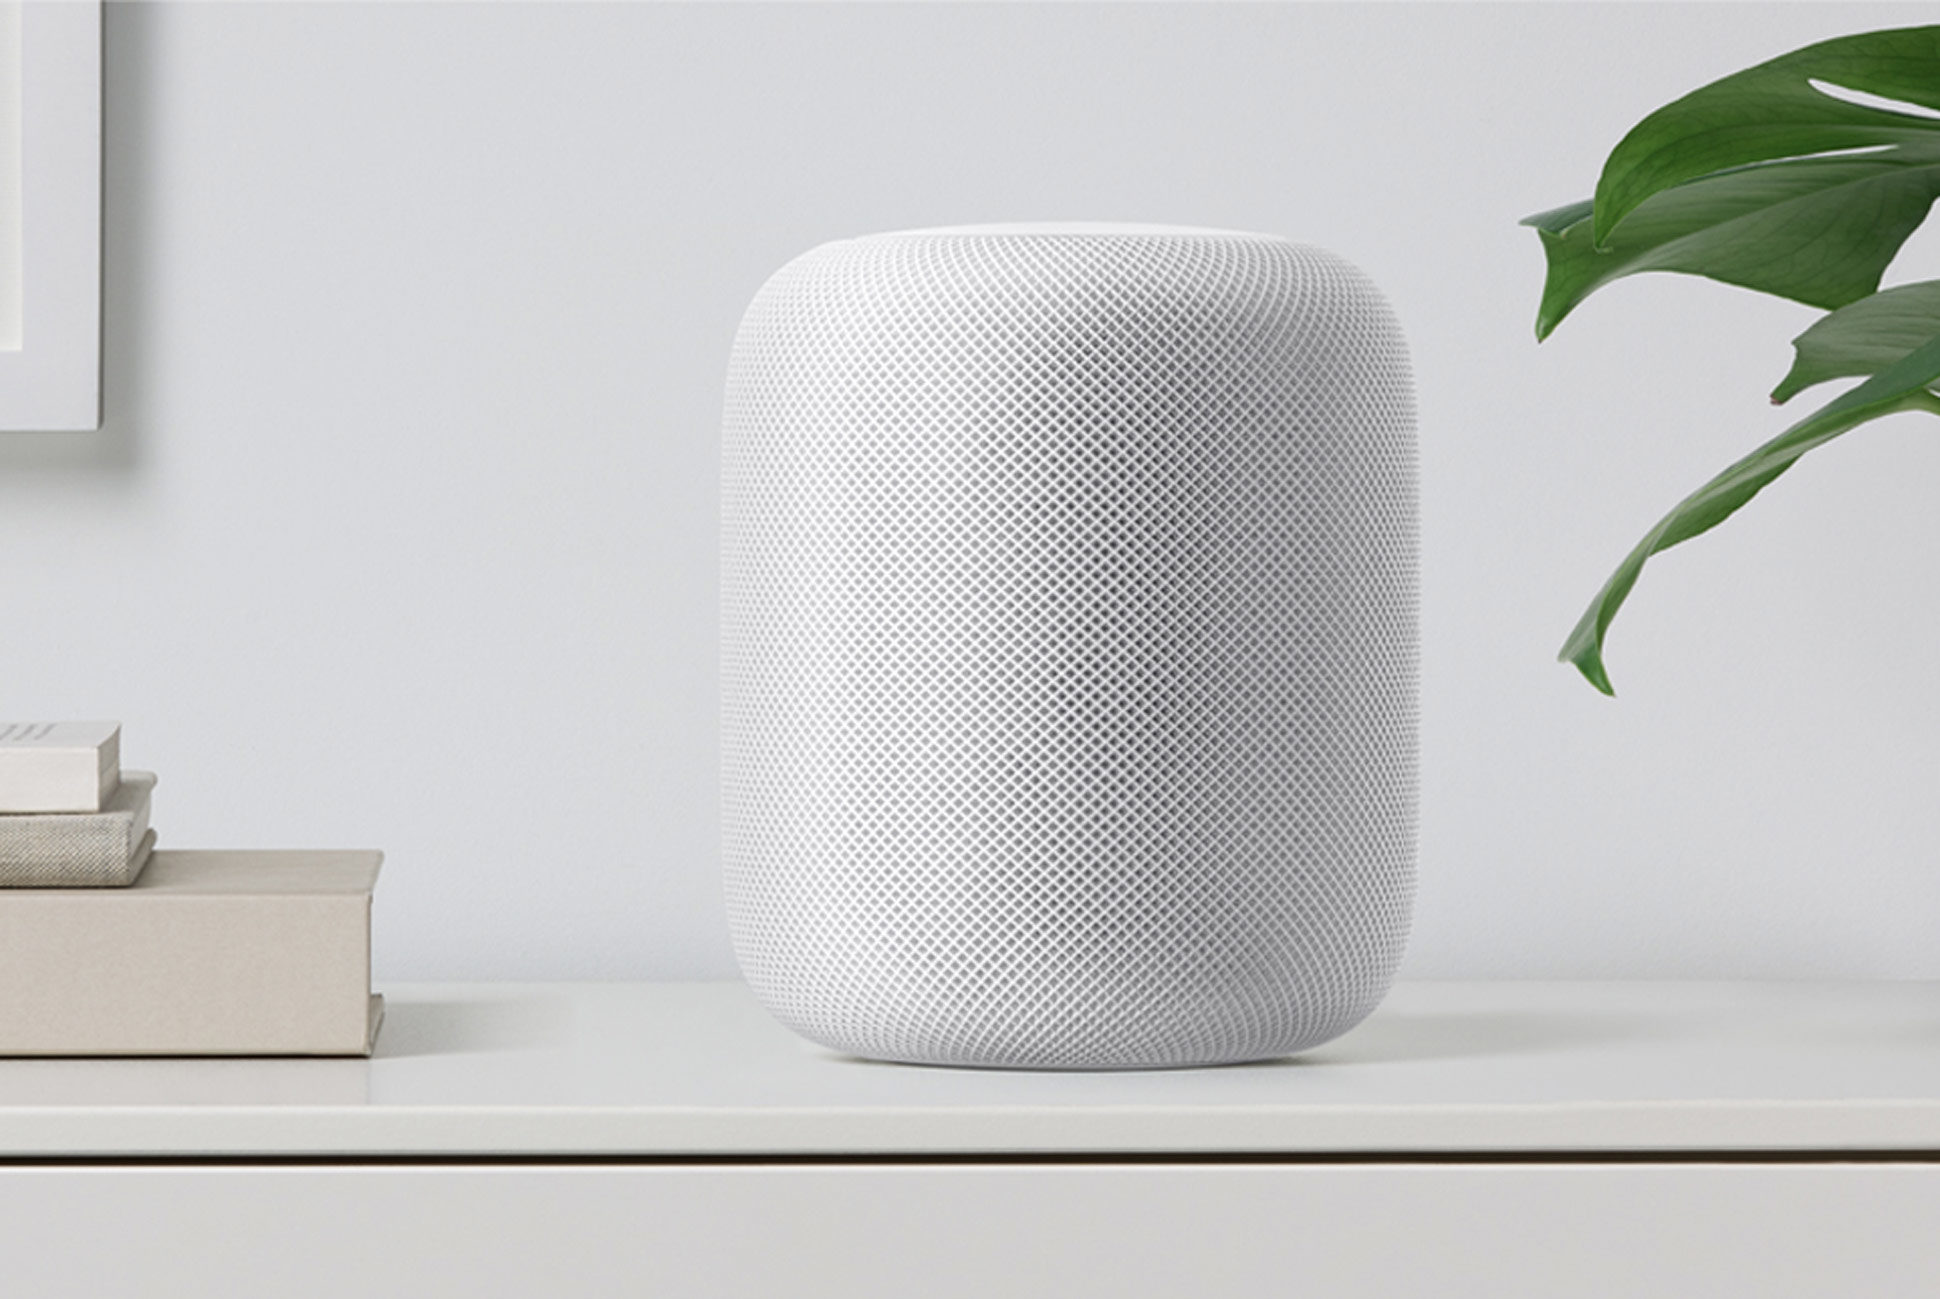 Apple unveils its Smart Speaker HomePod at Worldwide Developers Conference